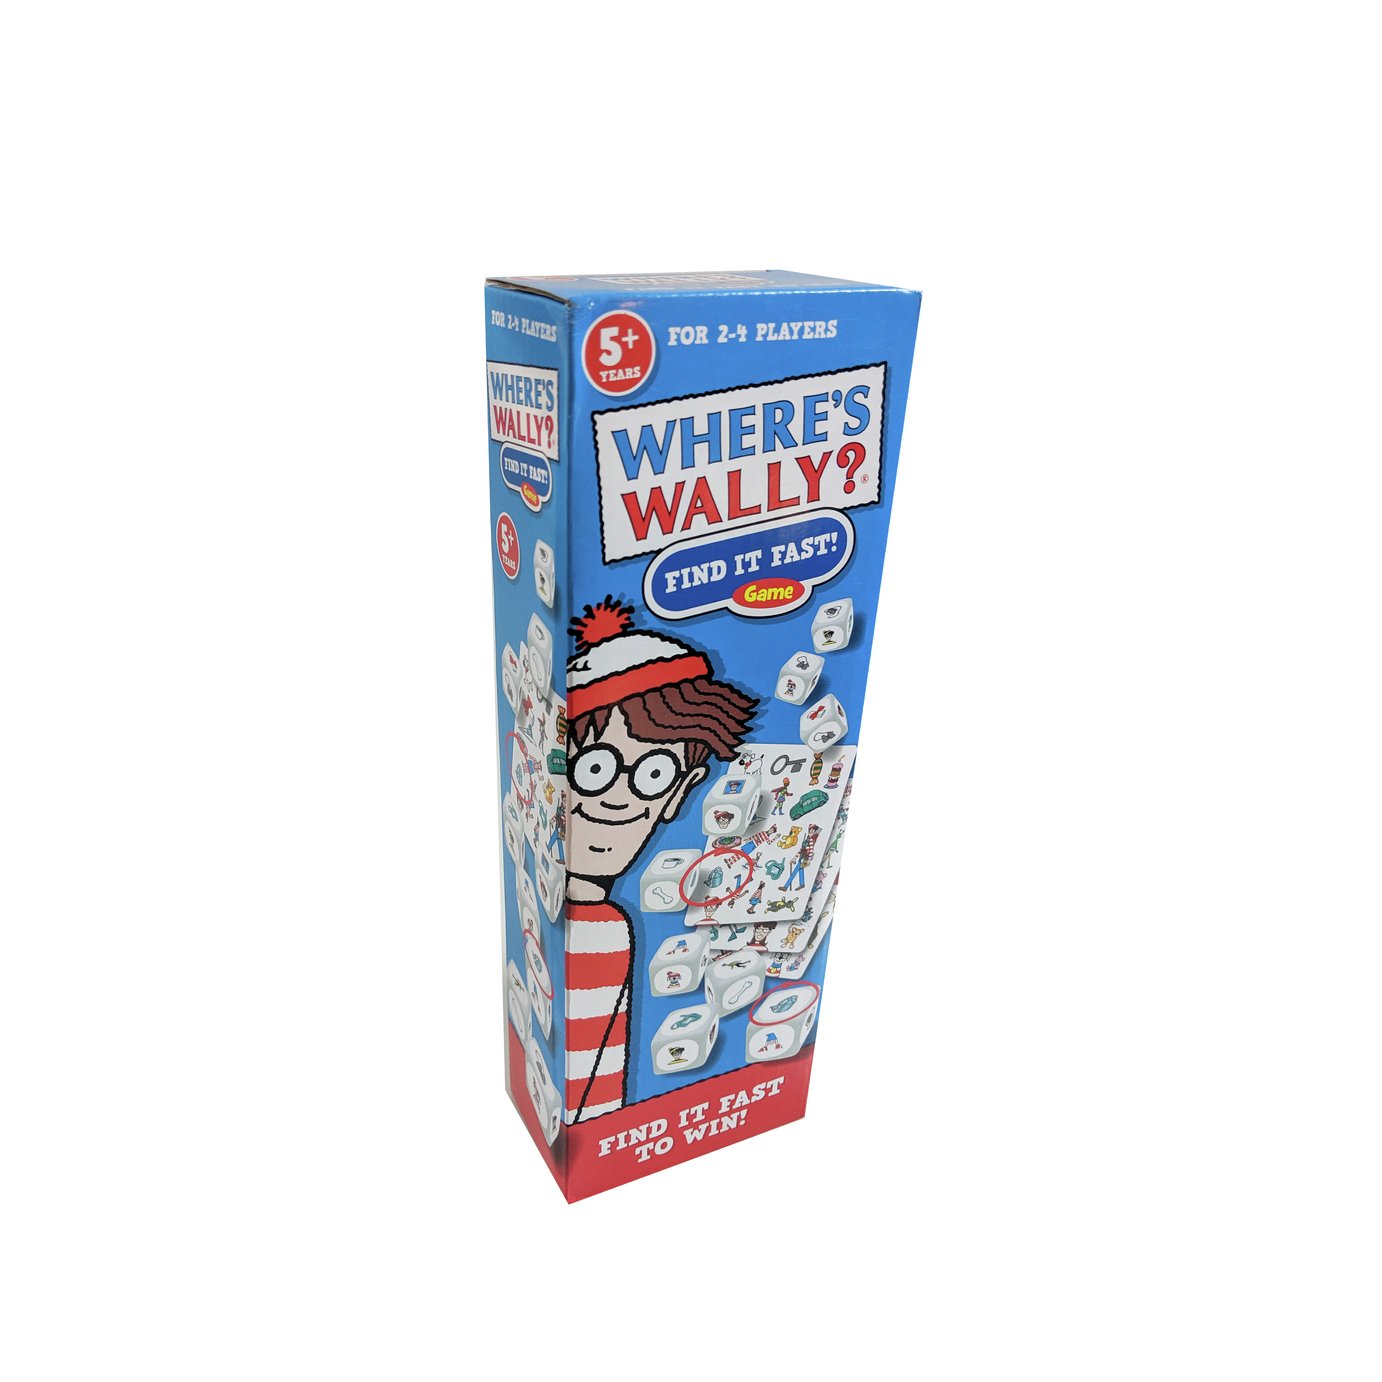 Where's Wally Find it Fast Review